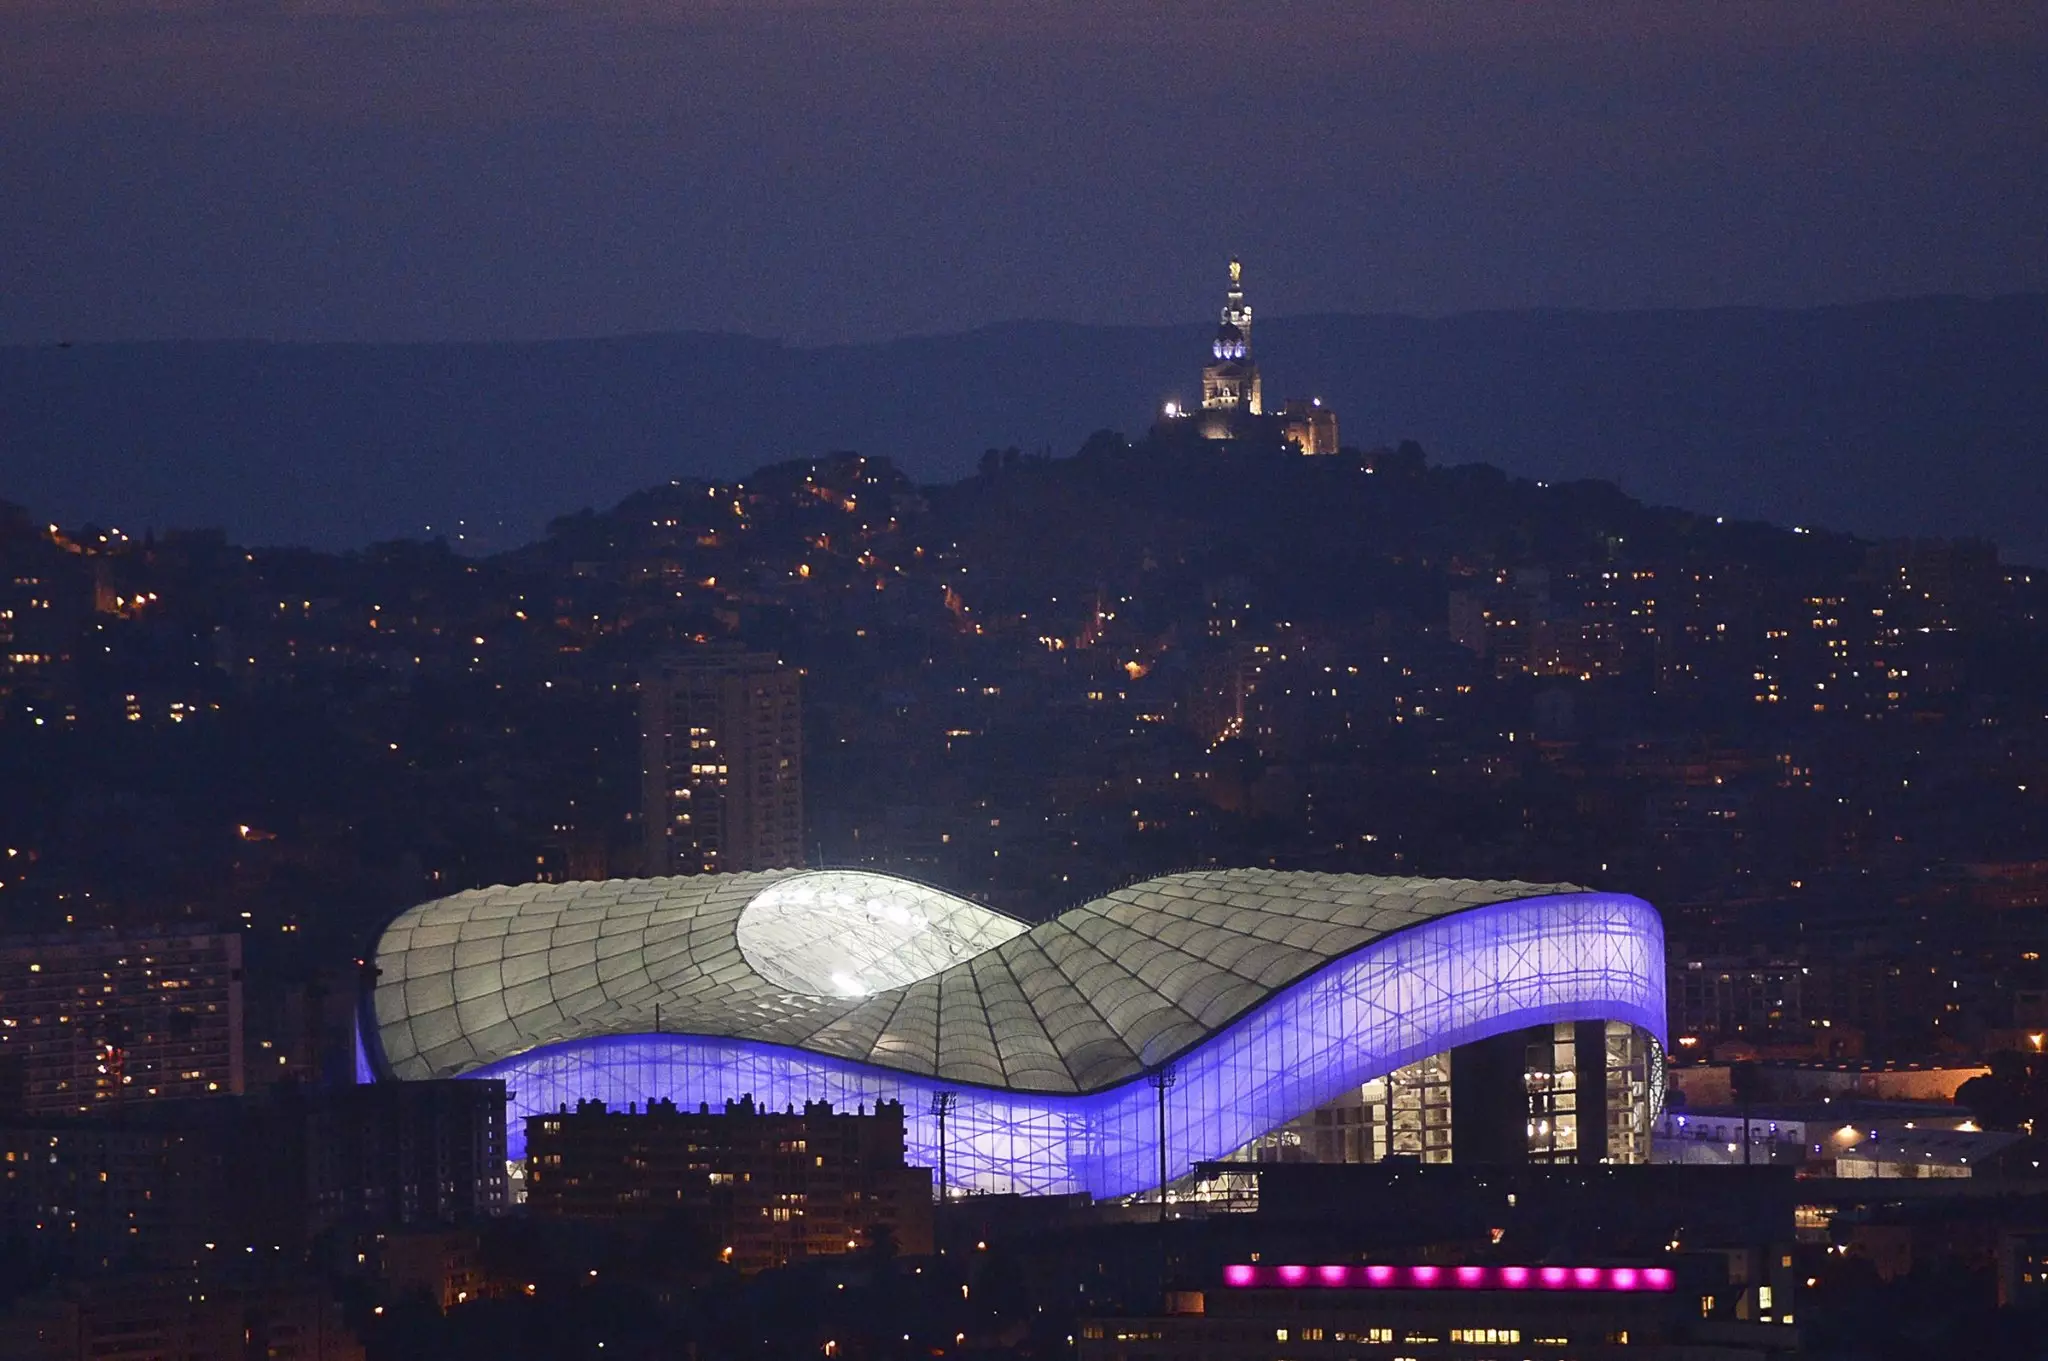 Presenting: The Stadiums Of Euro 2016